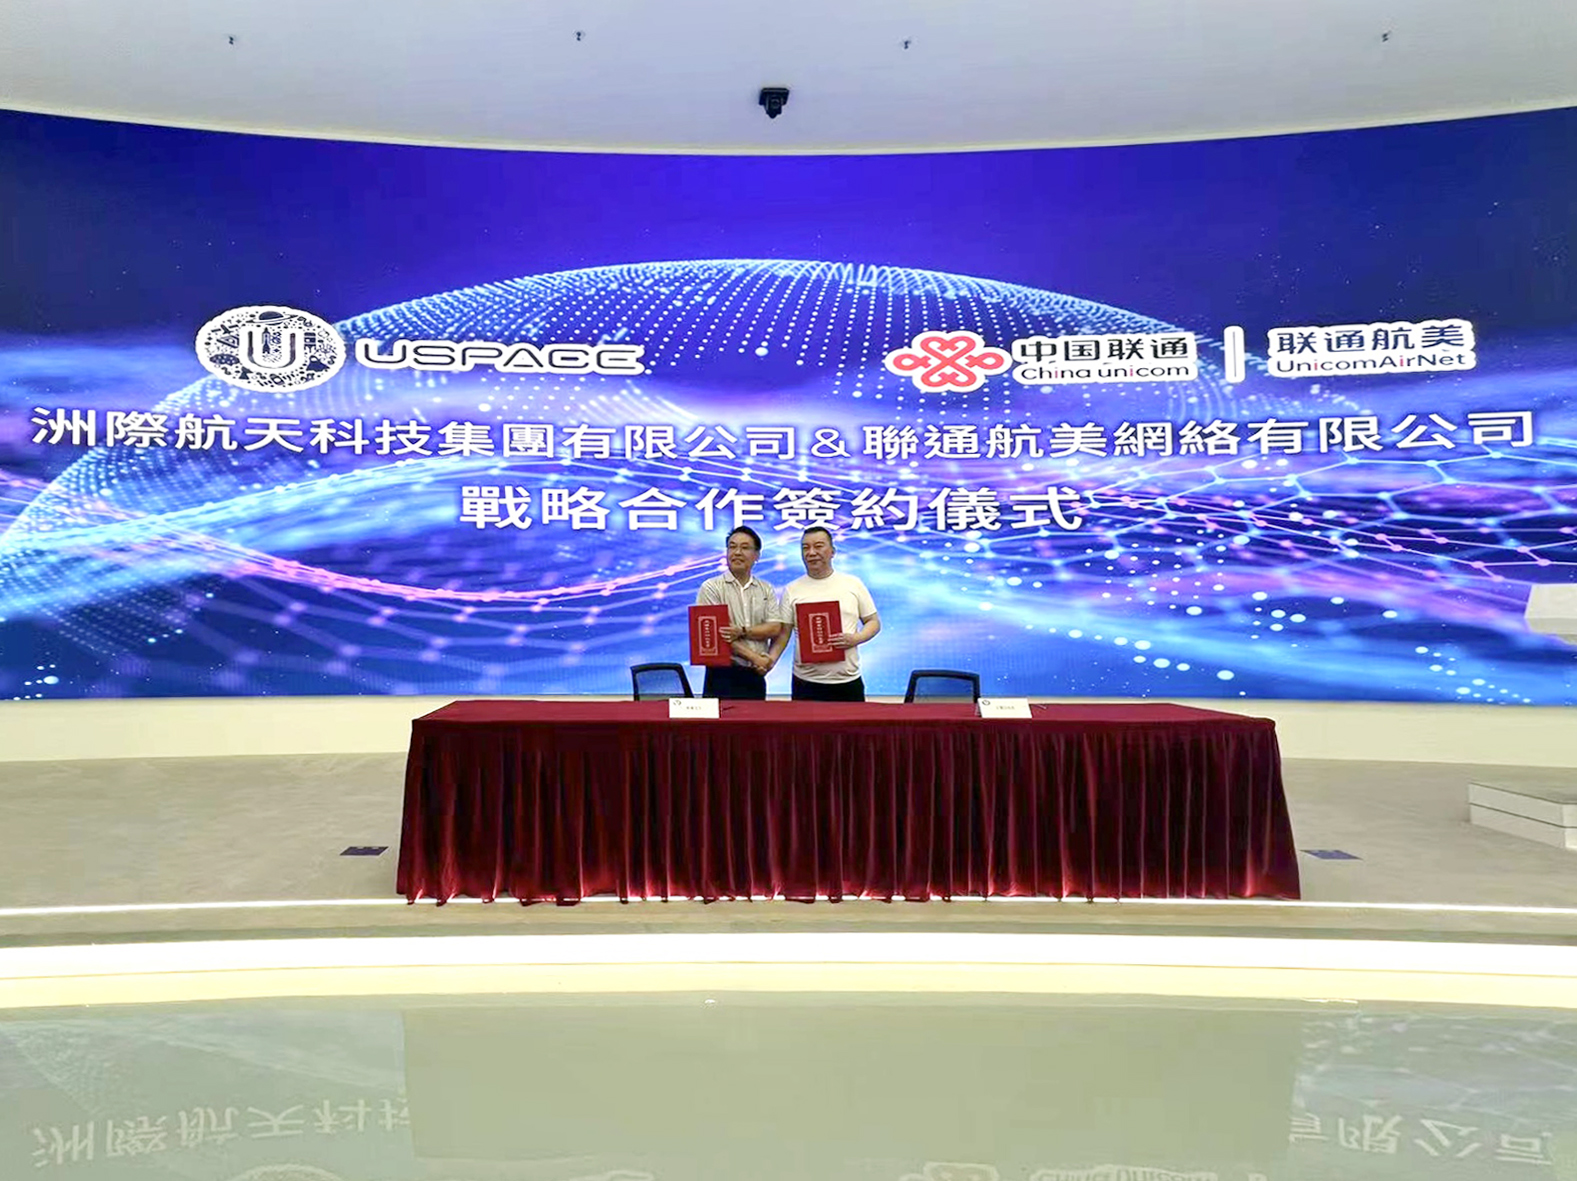 Uspace Technology Group Limited (USPACE), and China Unicom Air Net Co., Ltd. (China Unicom Air Net), Jointly Signed a Strategic Cooperation Agreement